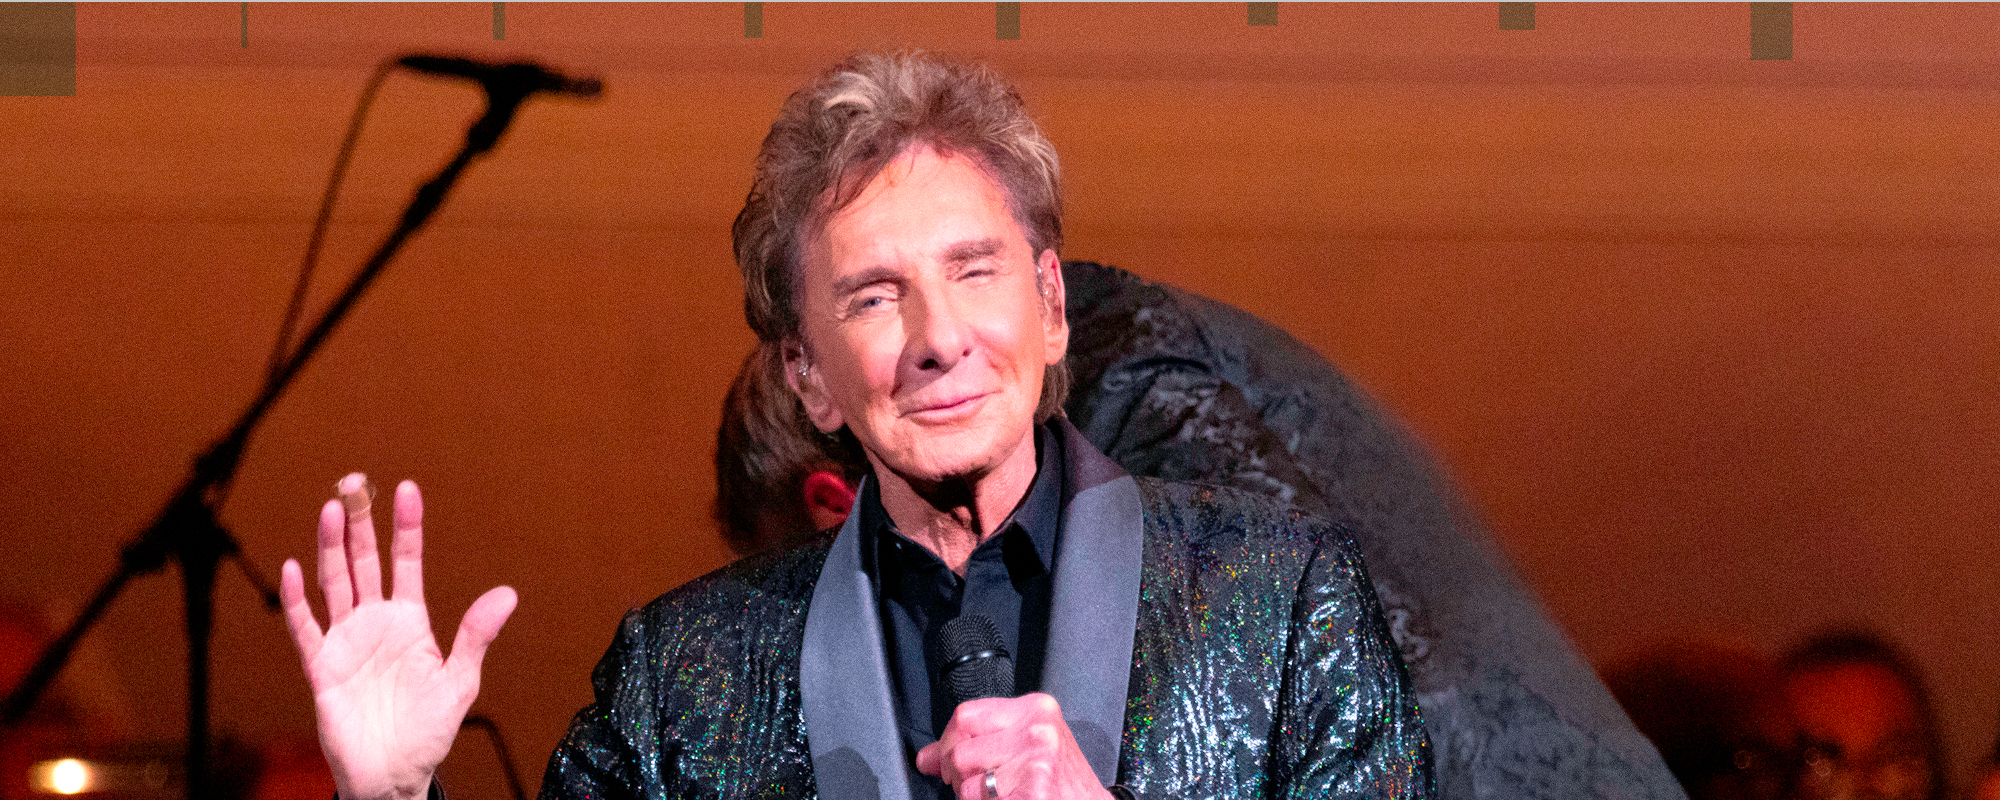 Who Wrote Barry Manilow’s “I Write the Songs”?